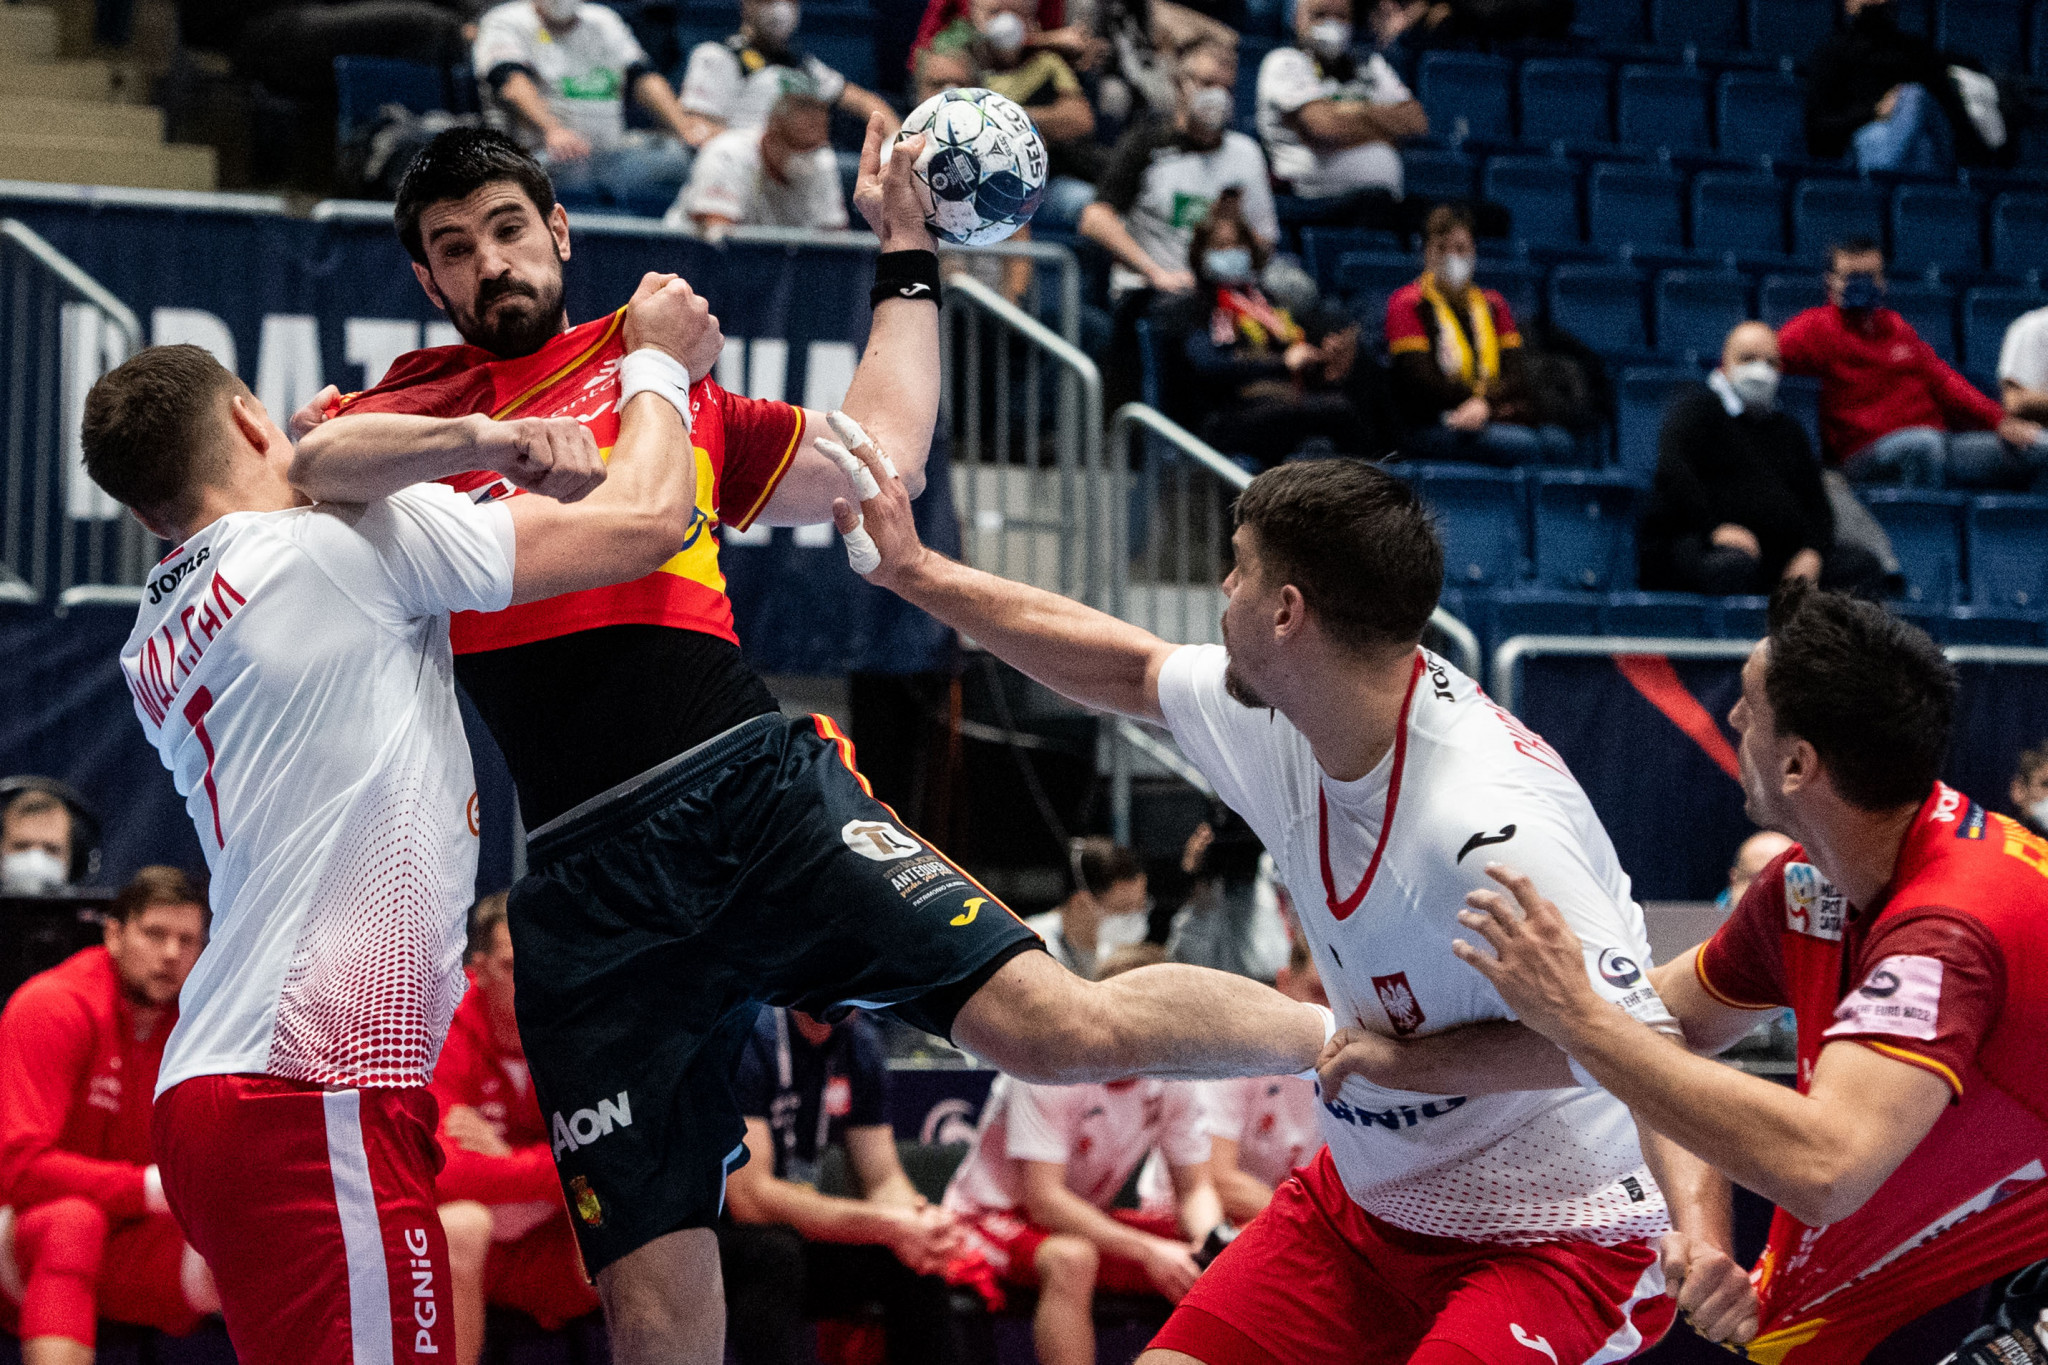 Holders Spain, playing in red shirts, reached the semi-finals of the Men's European Handball Championship after defeating Poland by a single point ©Getty Images 